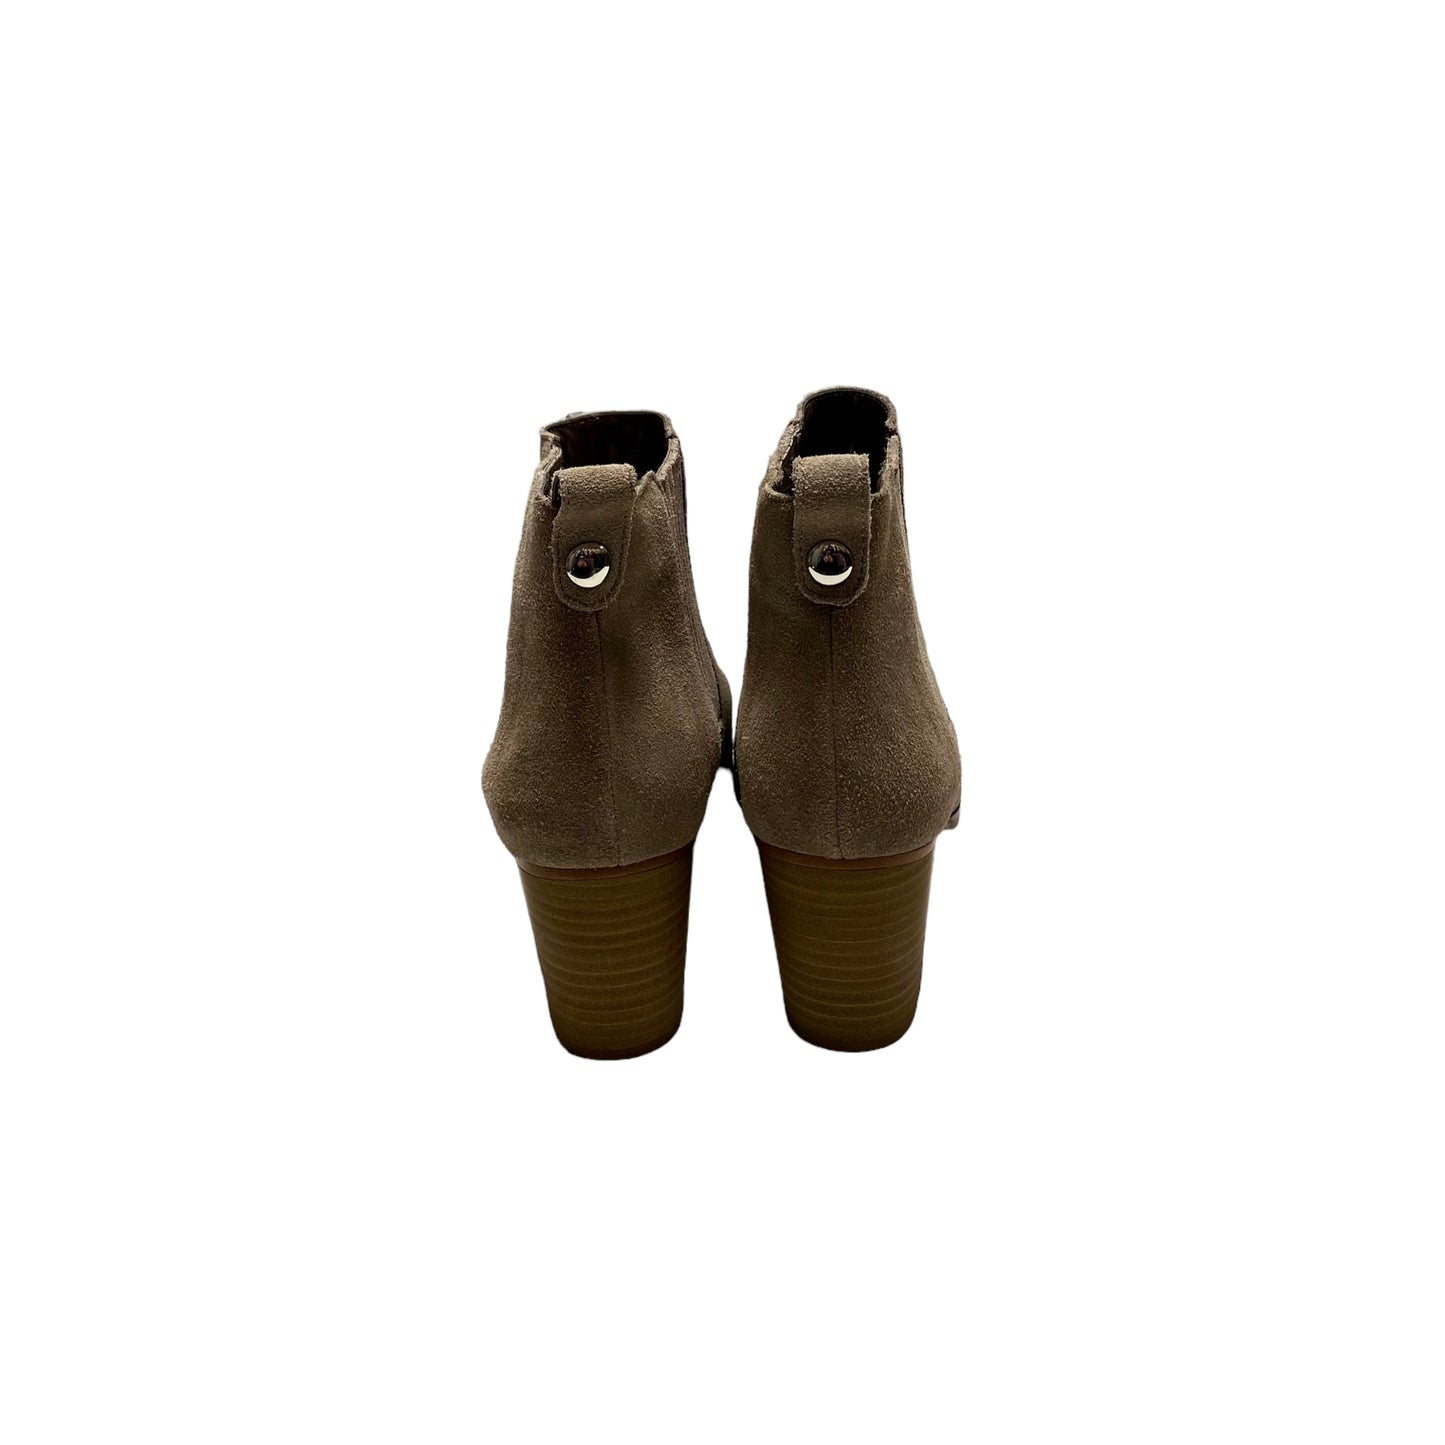 Boots Ankle Heels By Inc  Size: 7.5